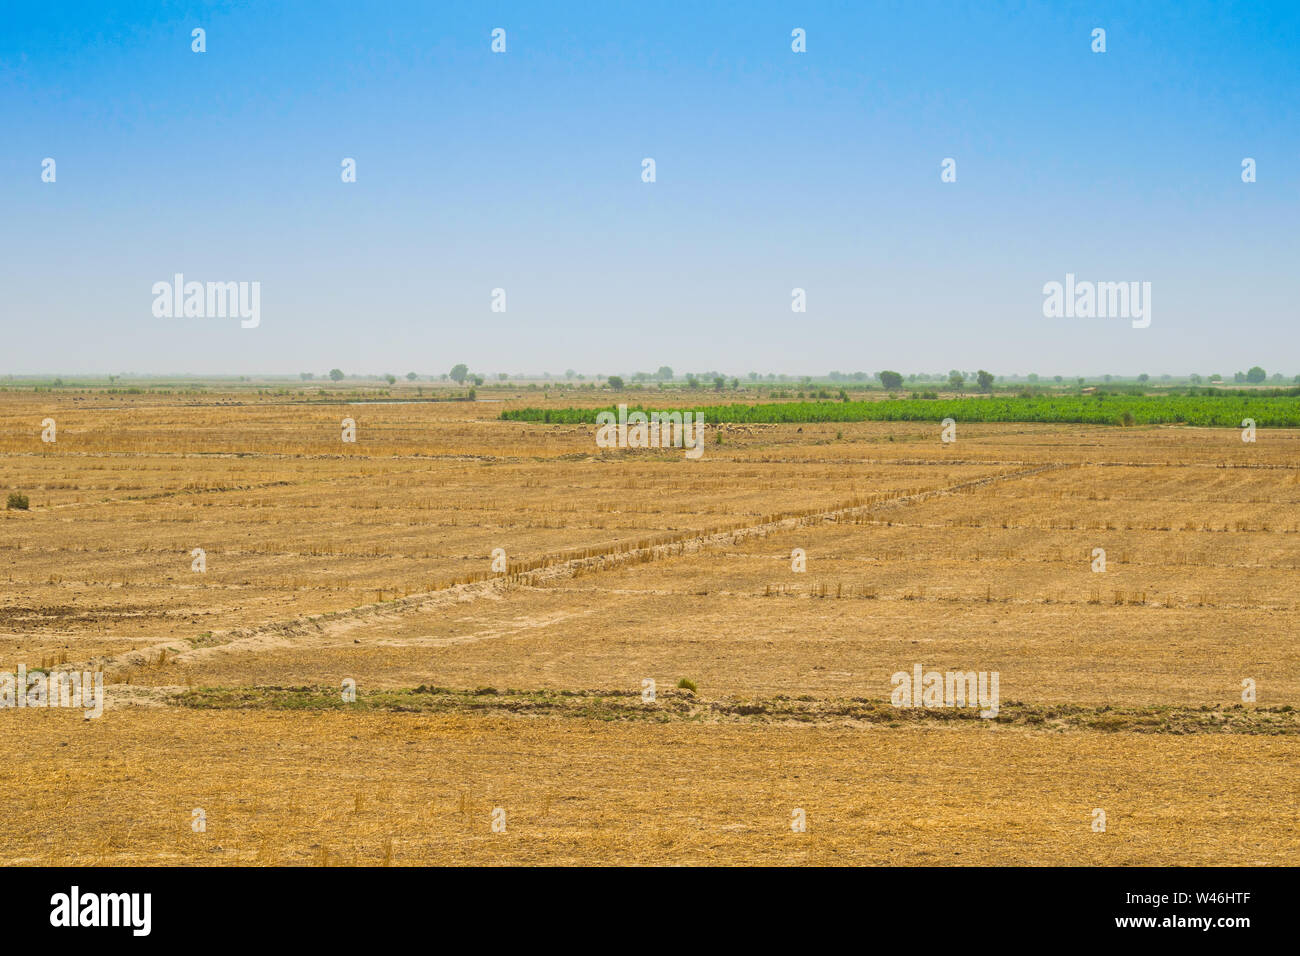 view of wheat field after harvest in rahim yar khan,pakistan.golden crop field after cutting. Stock Photo